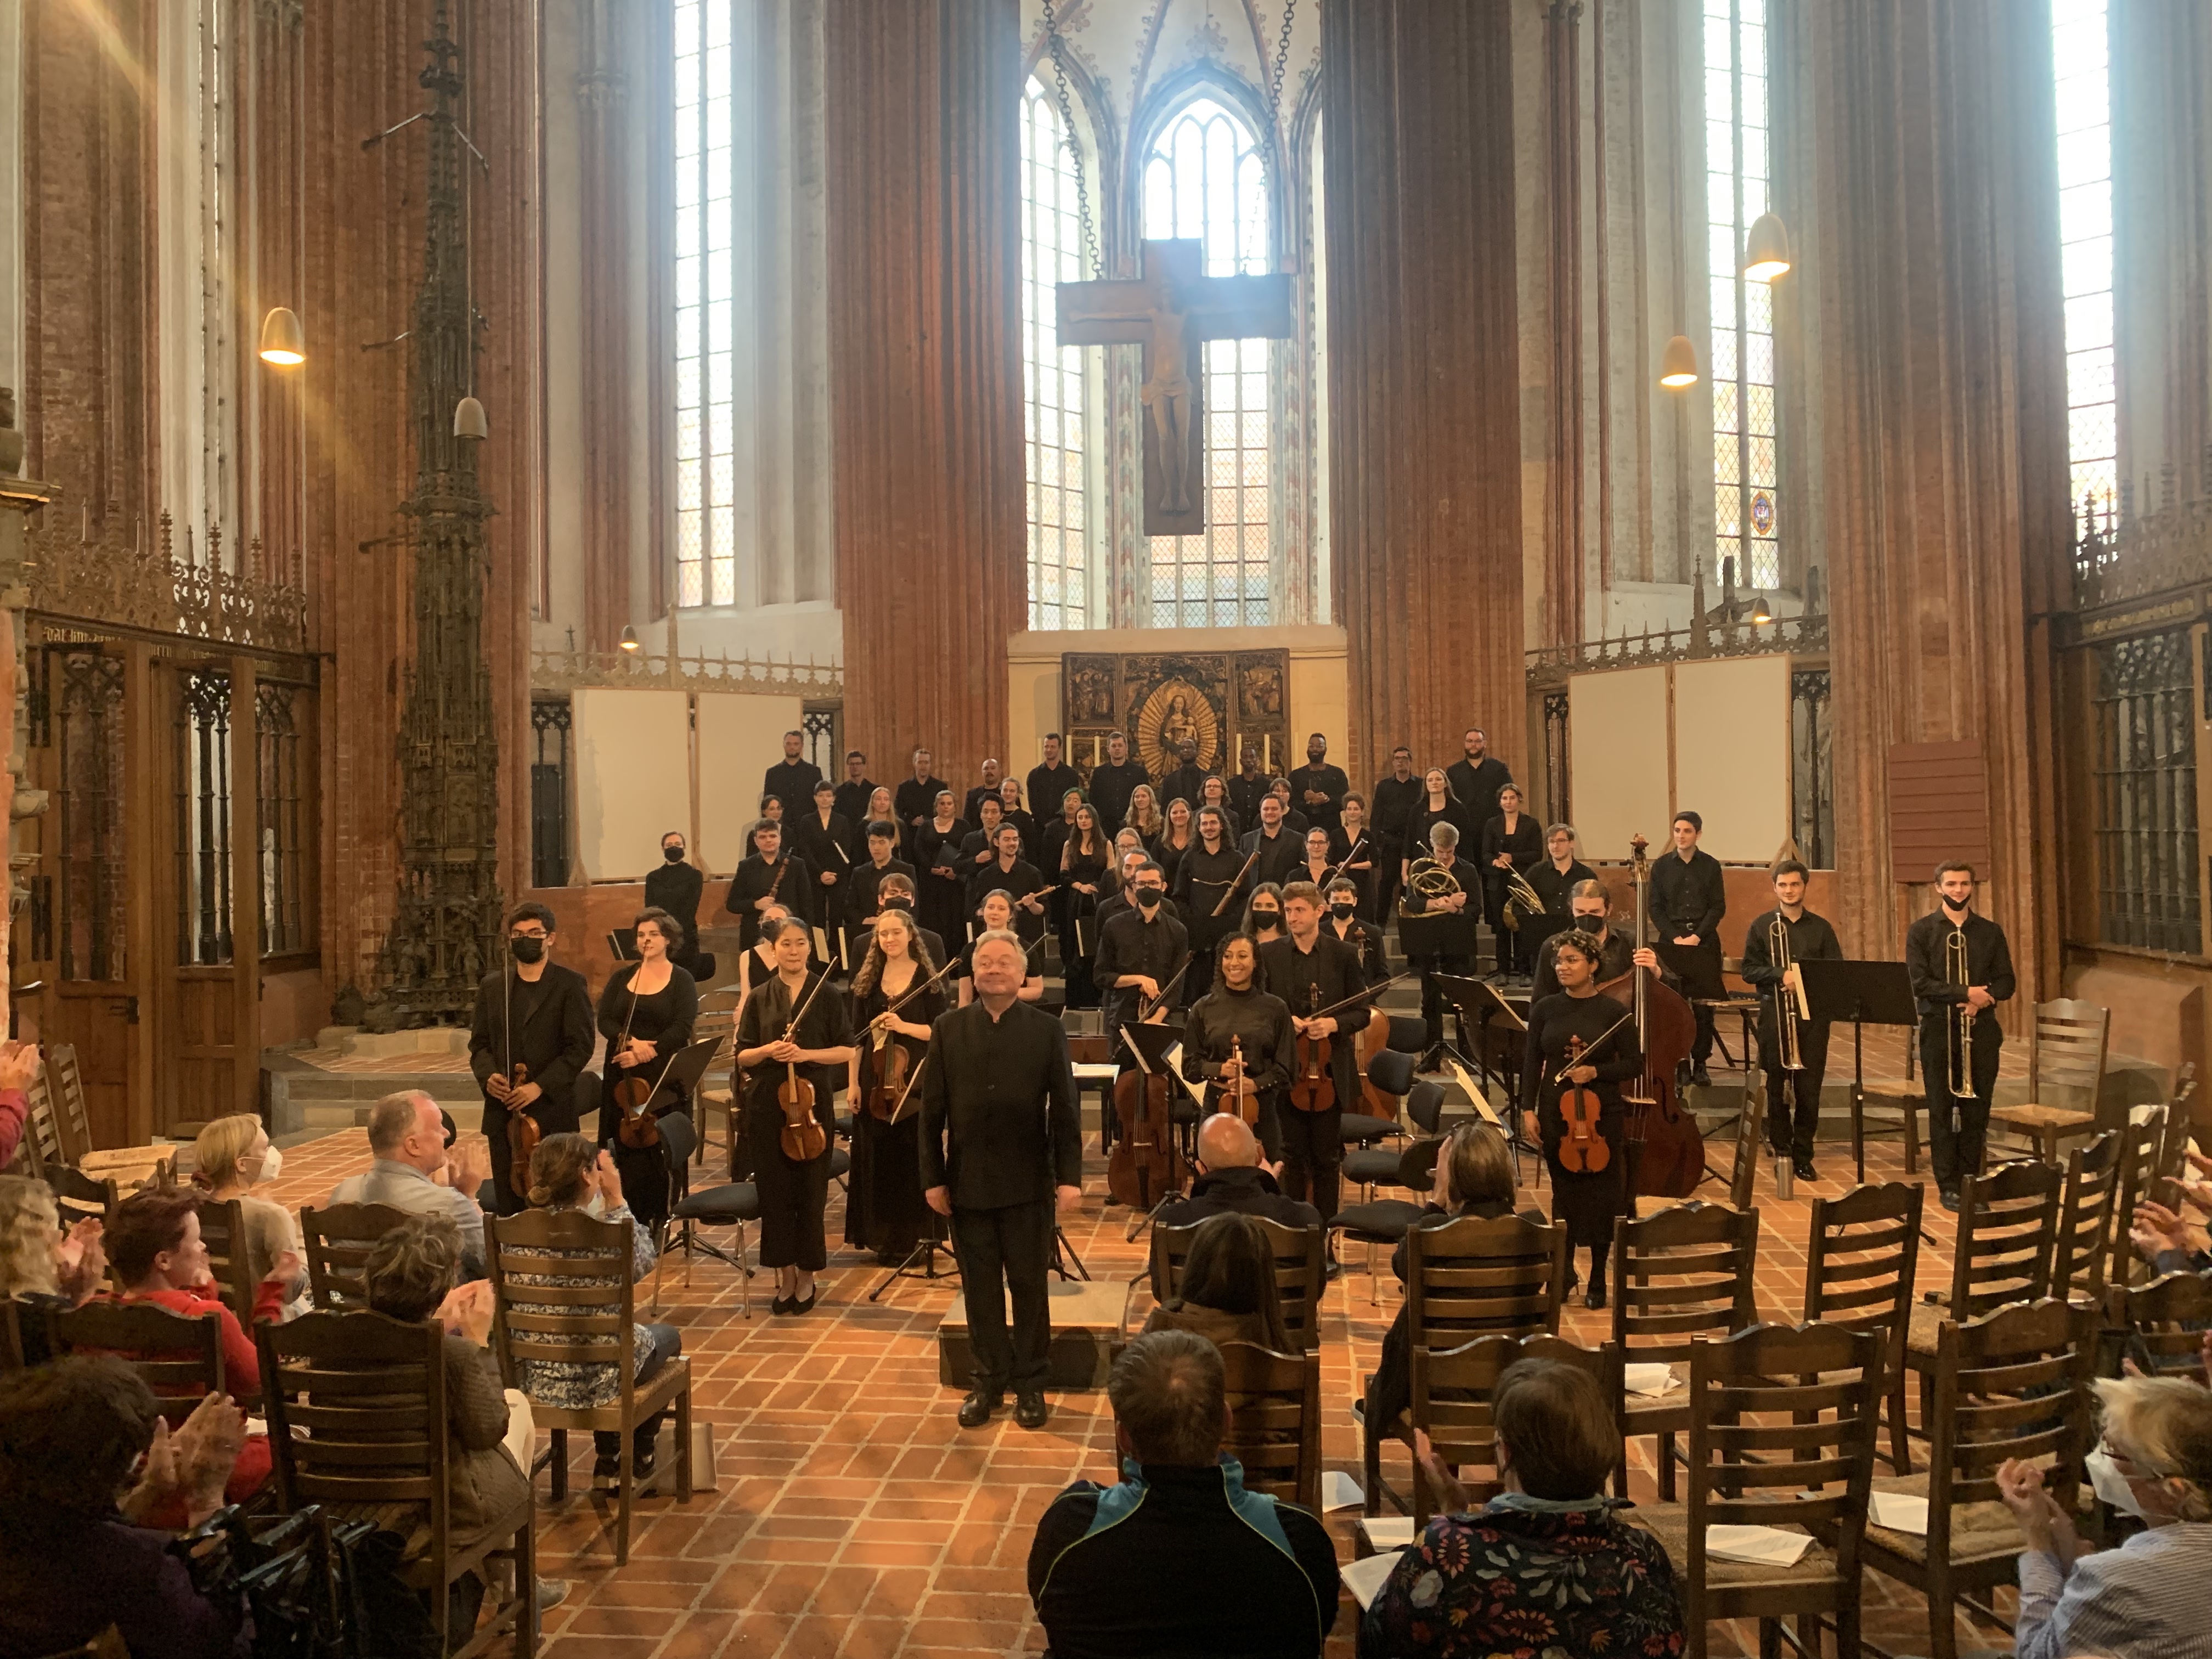 The ensemble stands for an ovation after a performance in a church sanctuary